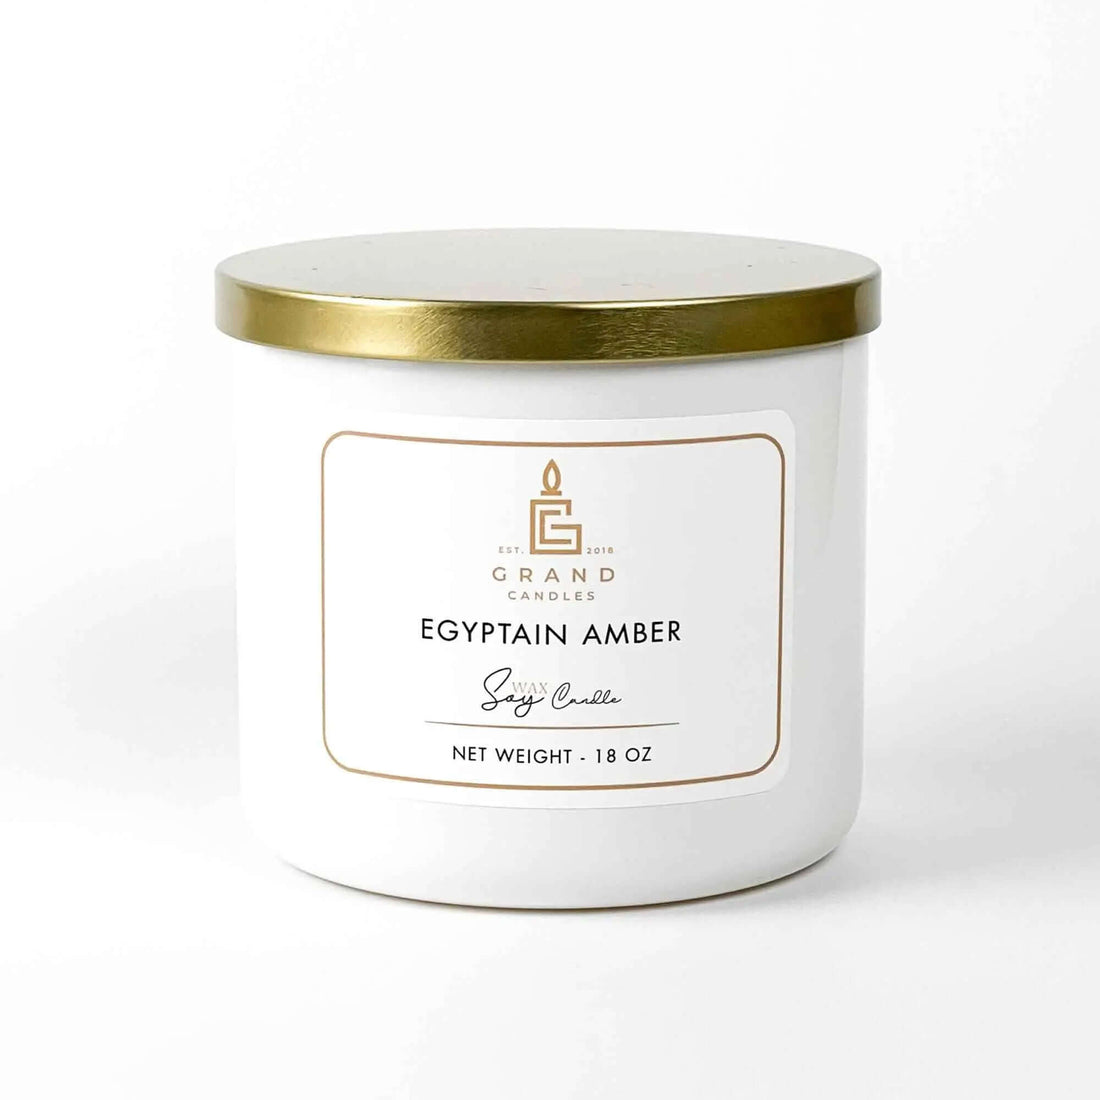 Egyptian Amber Scented Soy Candle | Handmade Scented Soy Wax Candle